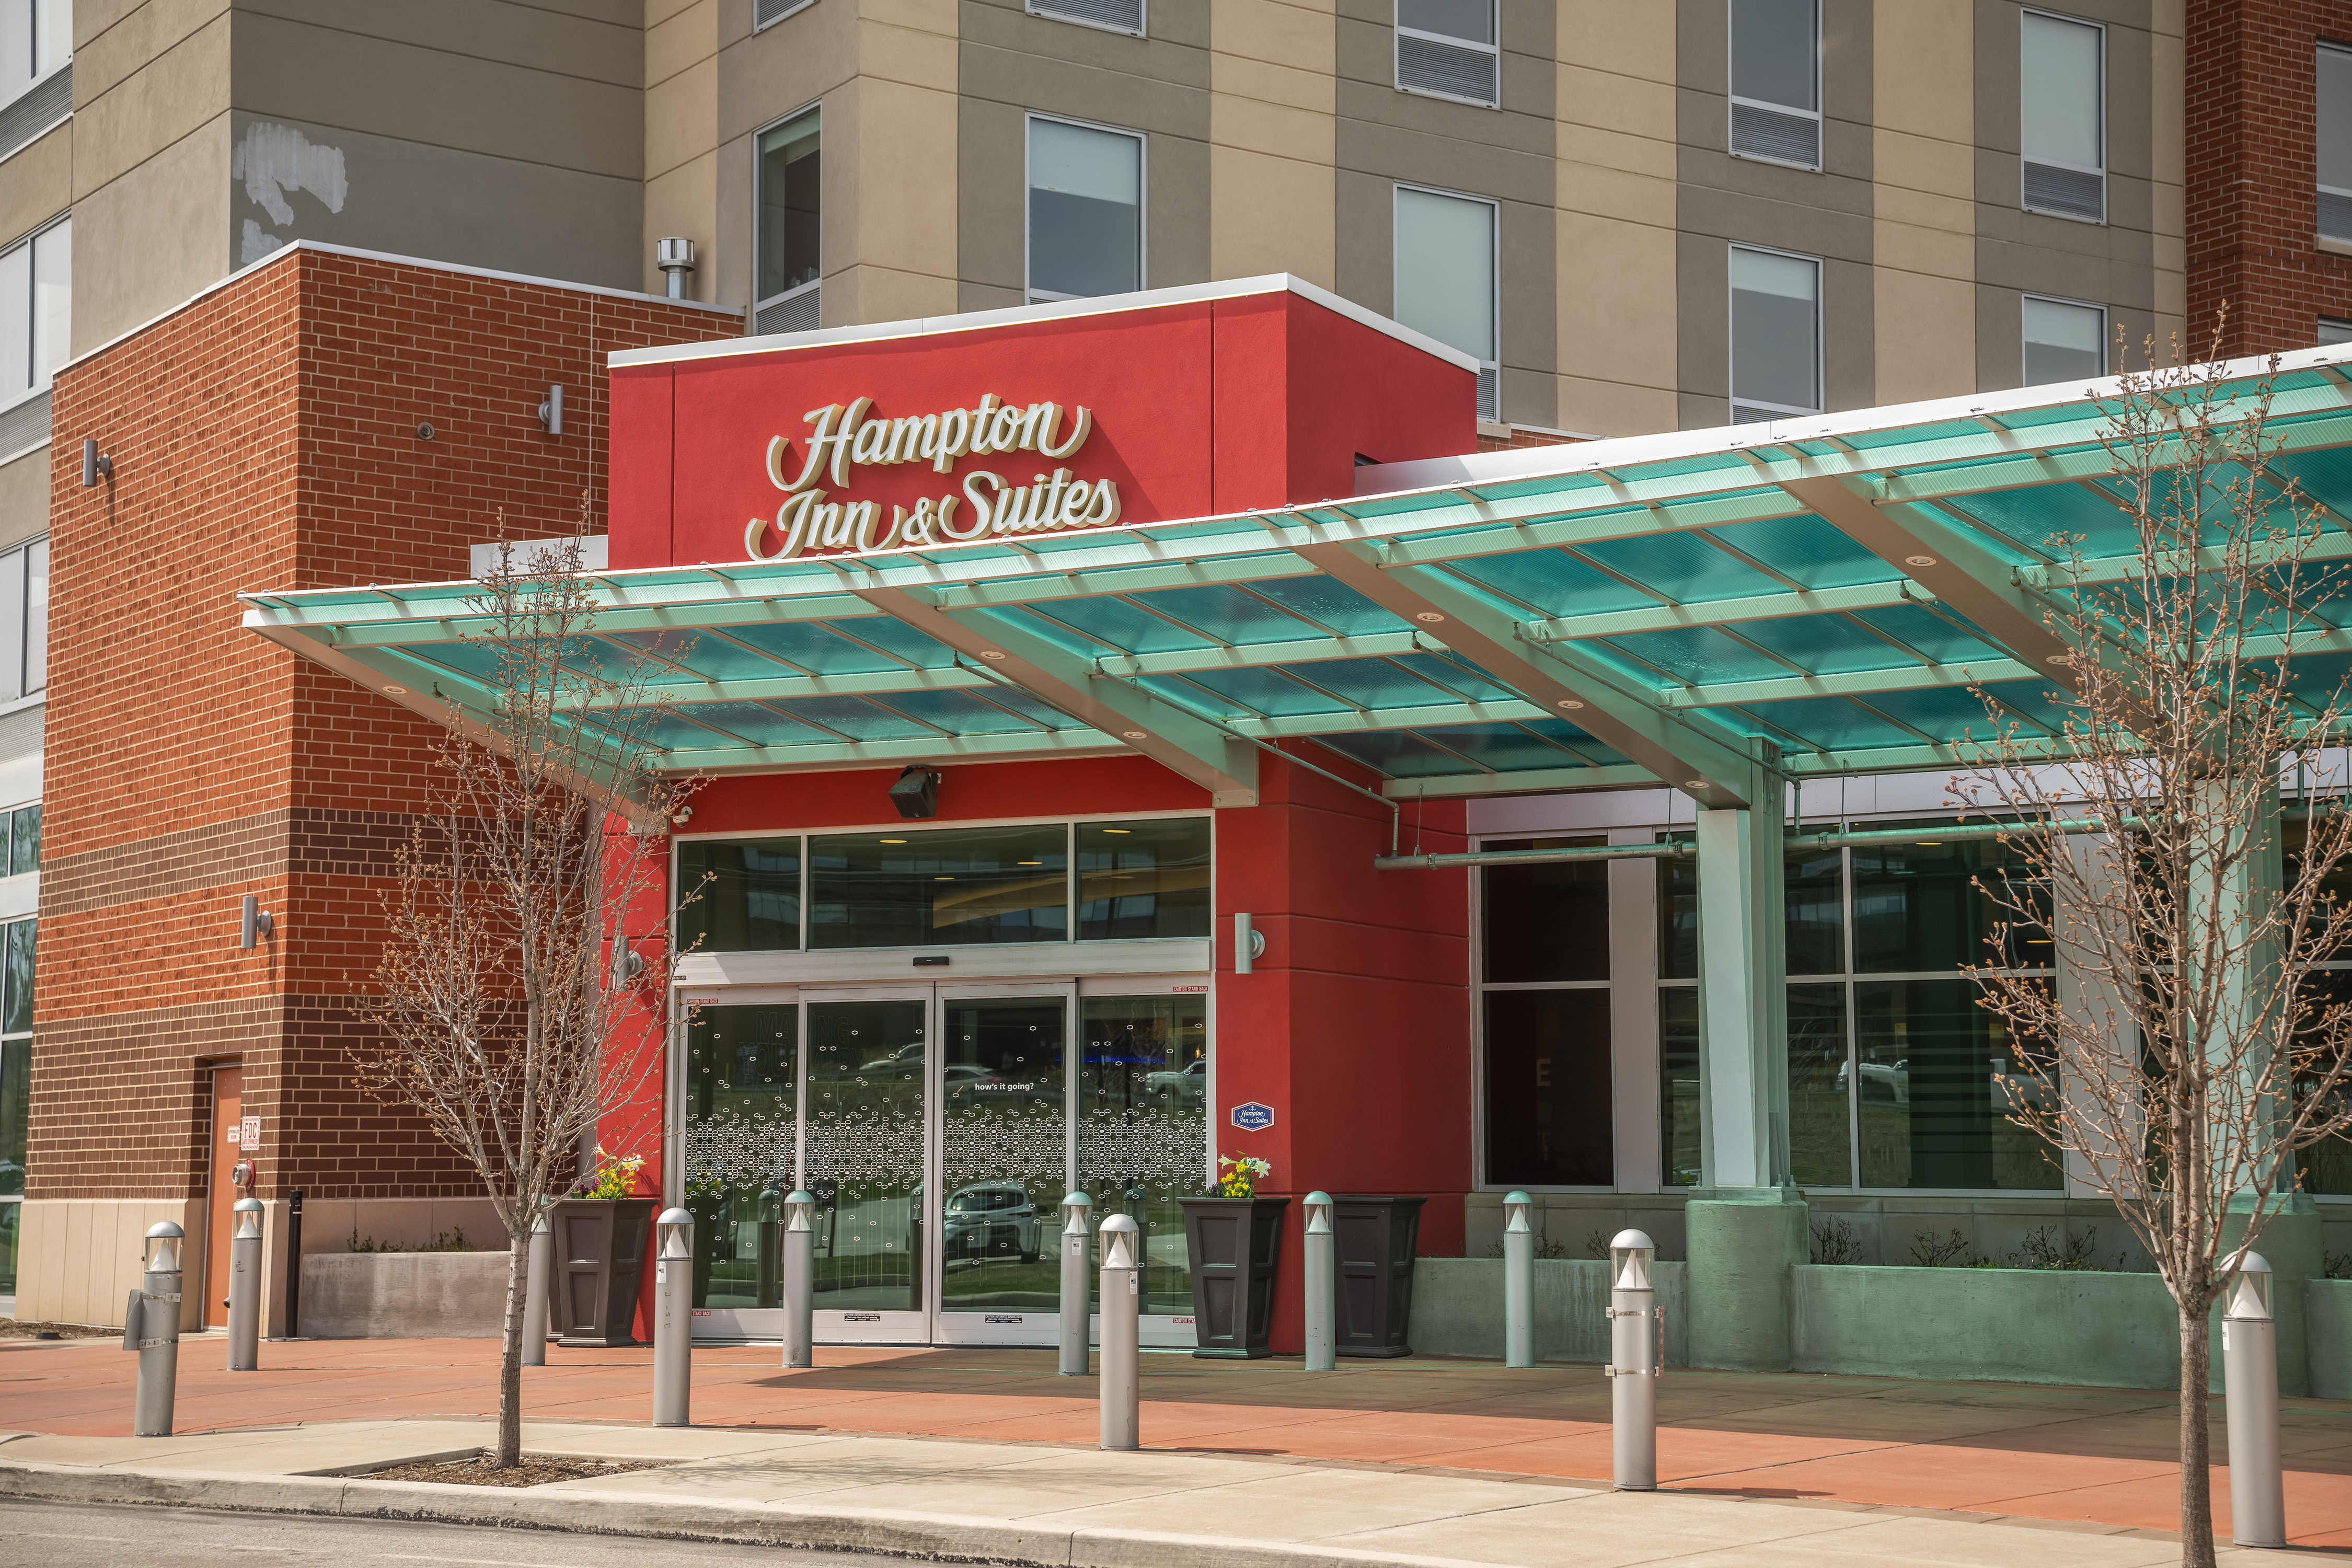 Hampton Inn and Suites Hotel Exterior and Entrance